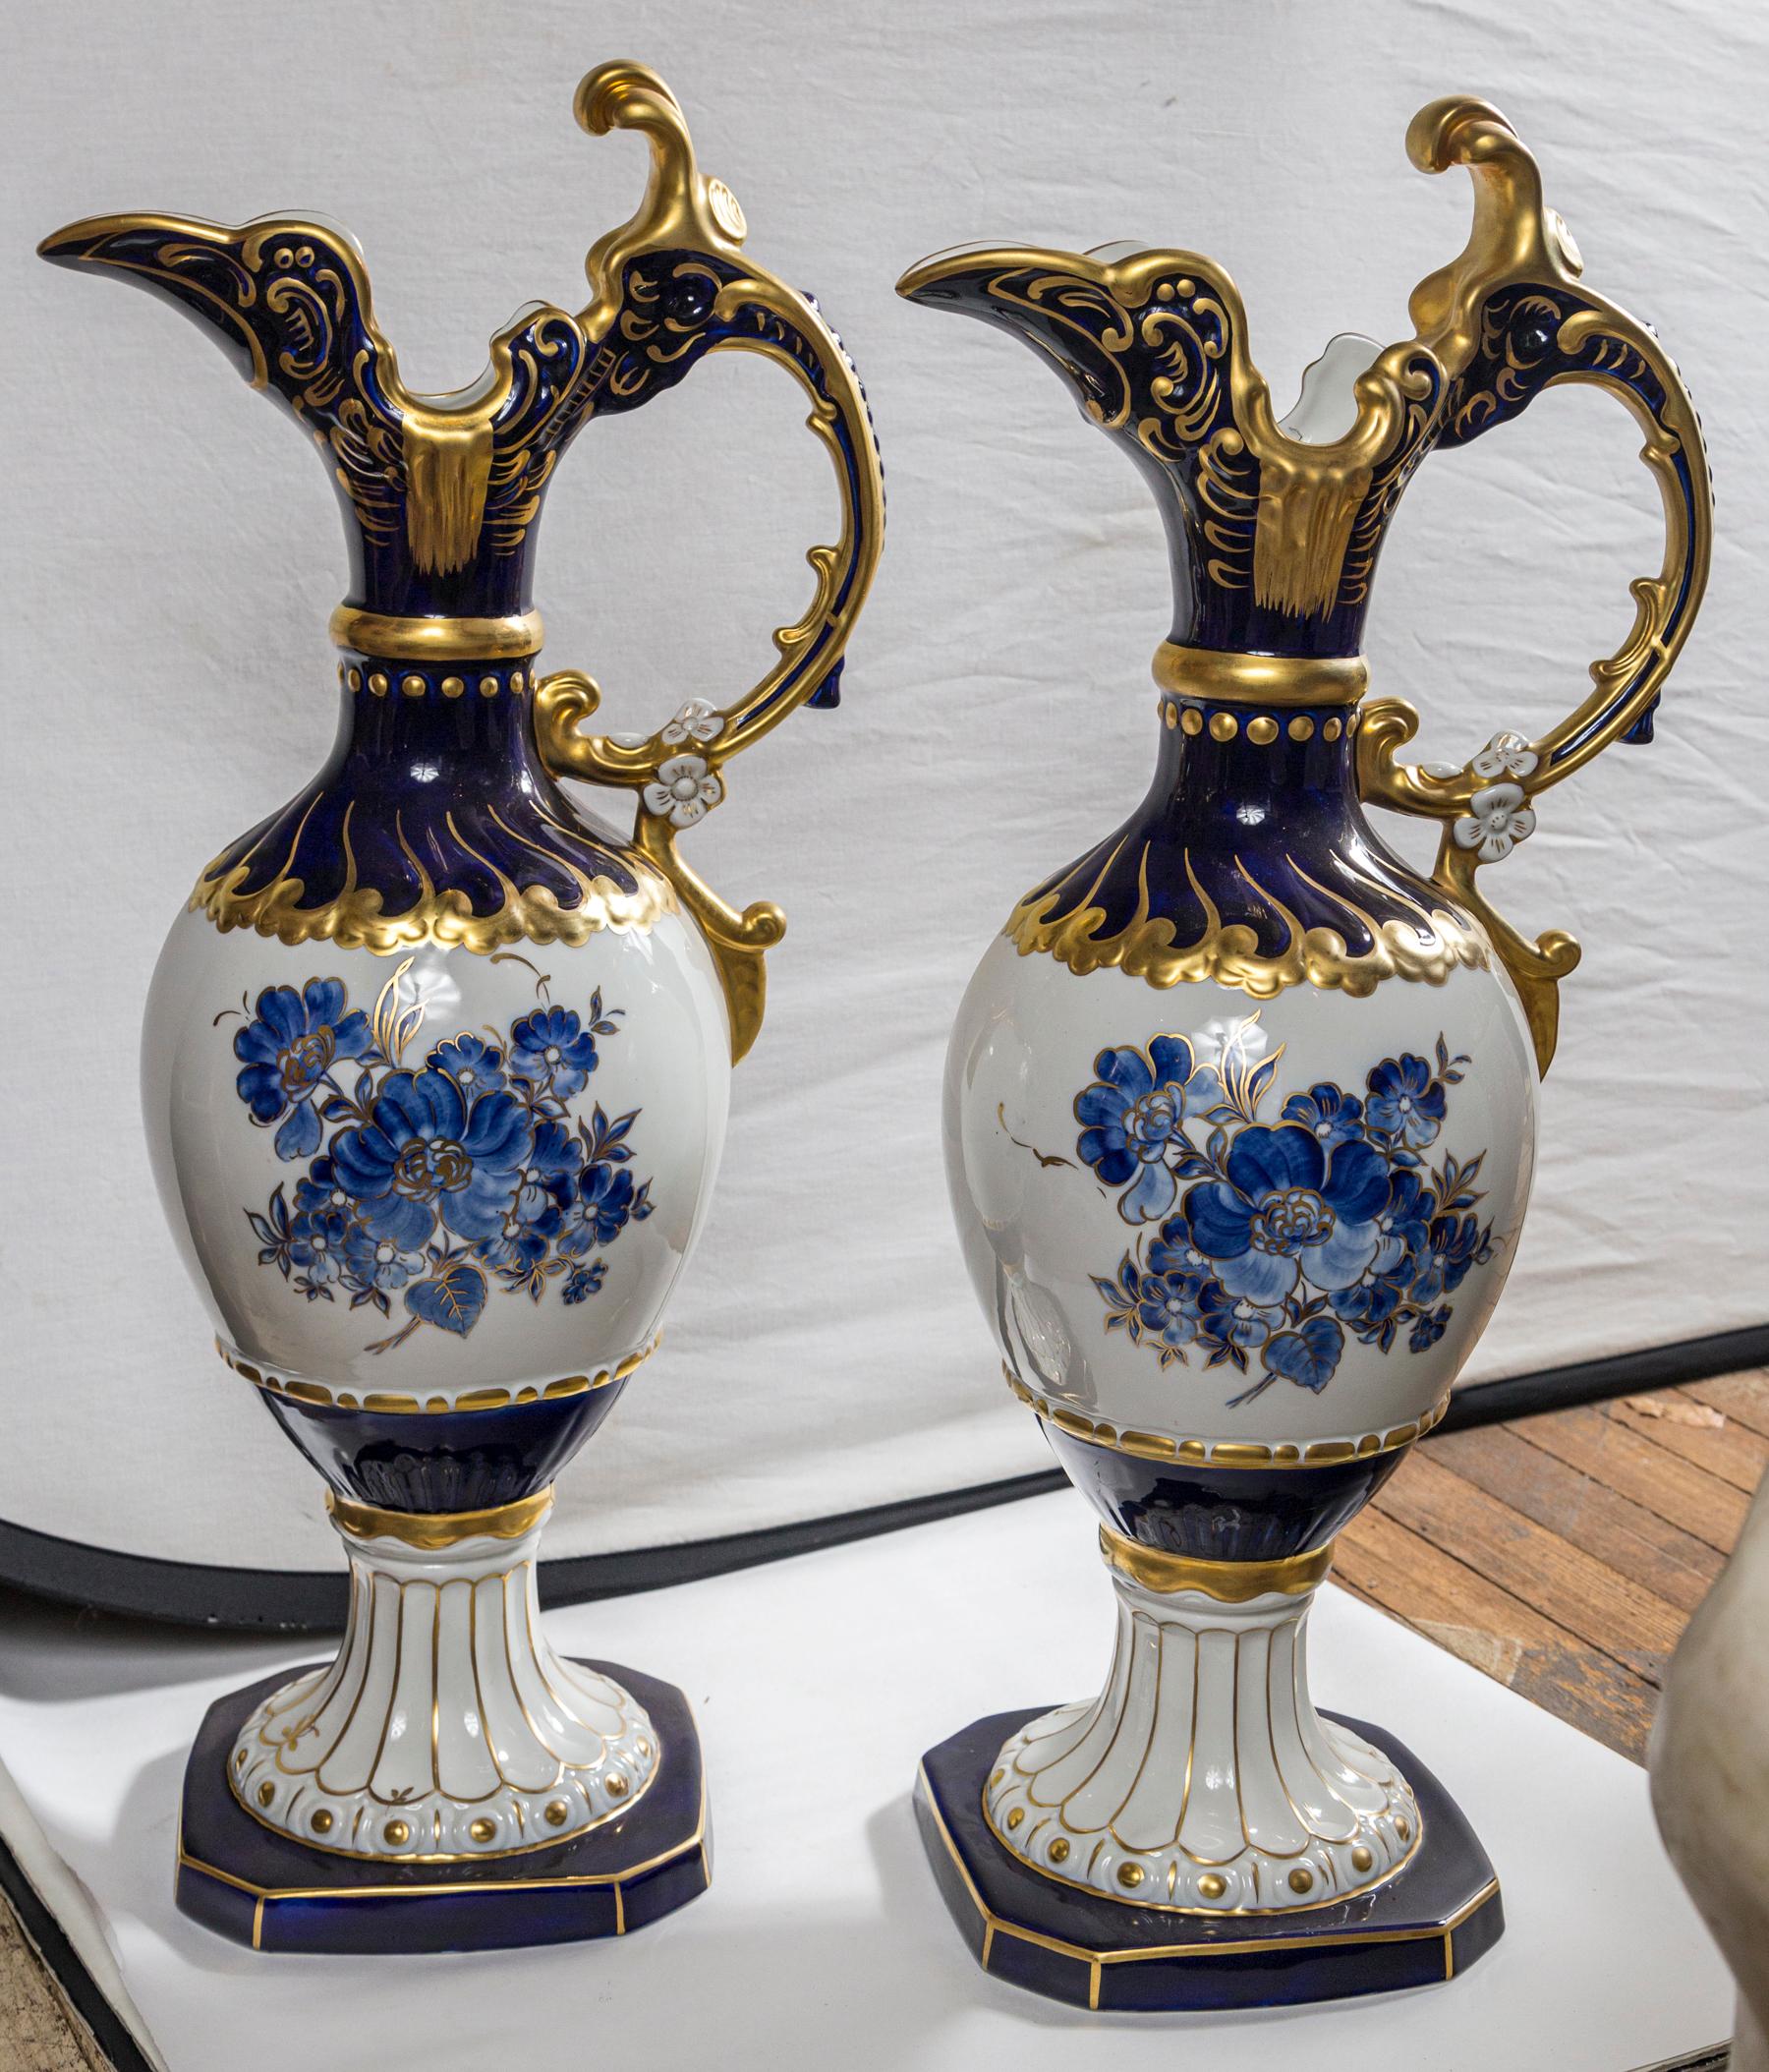 This pair has a blue and gold top section, including the handle, a white mid section with blue flowers , a lower section, concluding base with gold and white above a cut corner blue and gold base.
The handle is 5 inches from the body at its